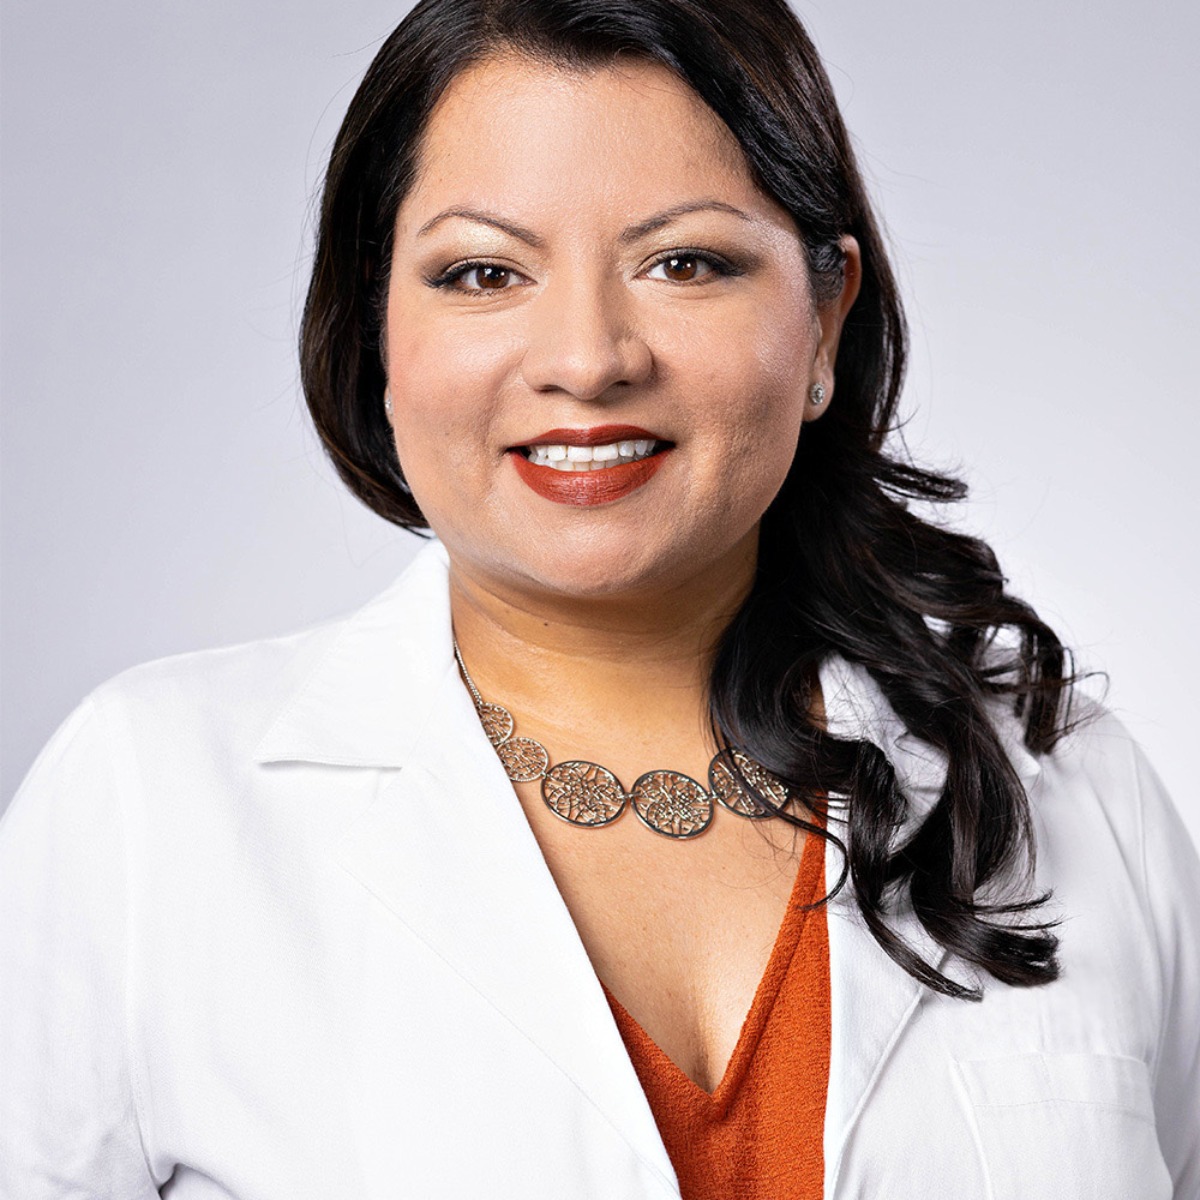 Dr. Achala Doraiswamy | Medical Oncologist for cCARE | San Diego